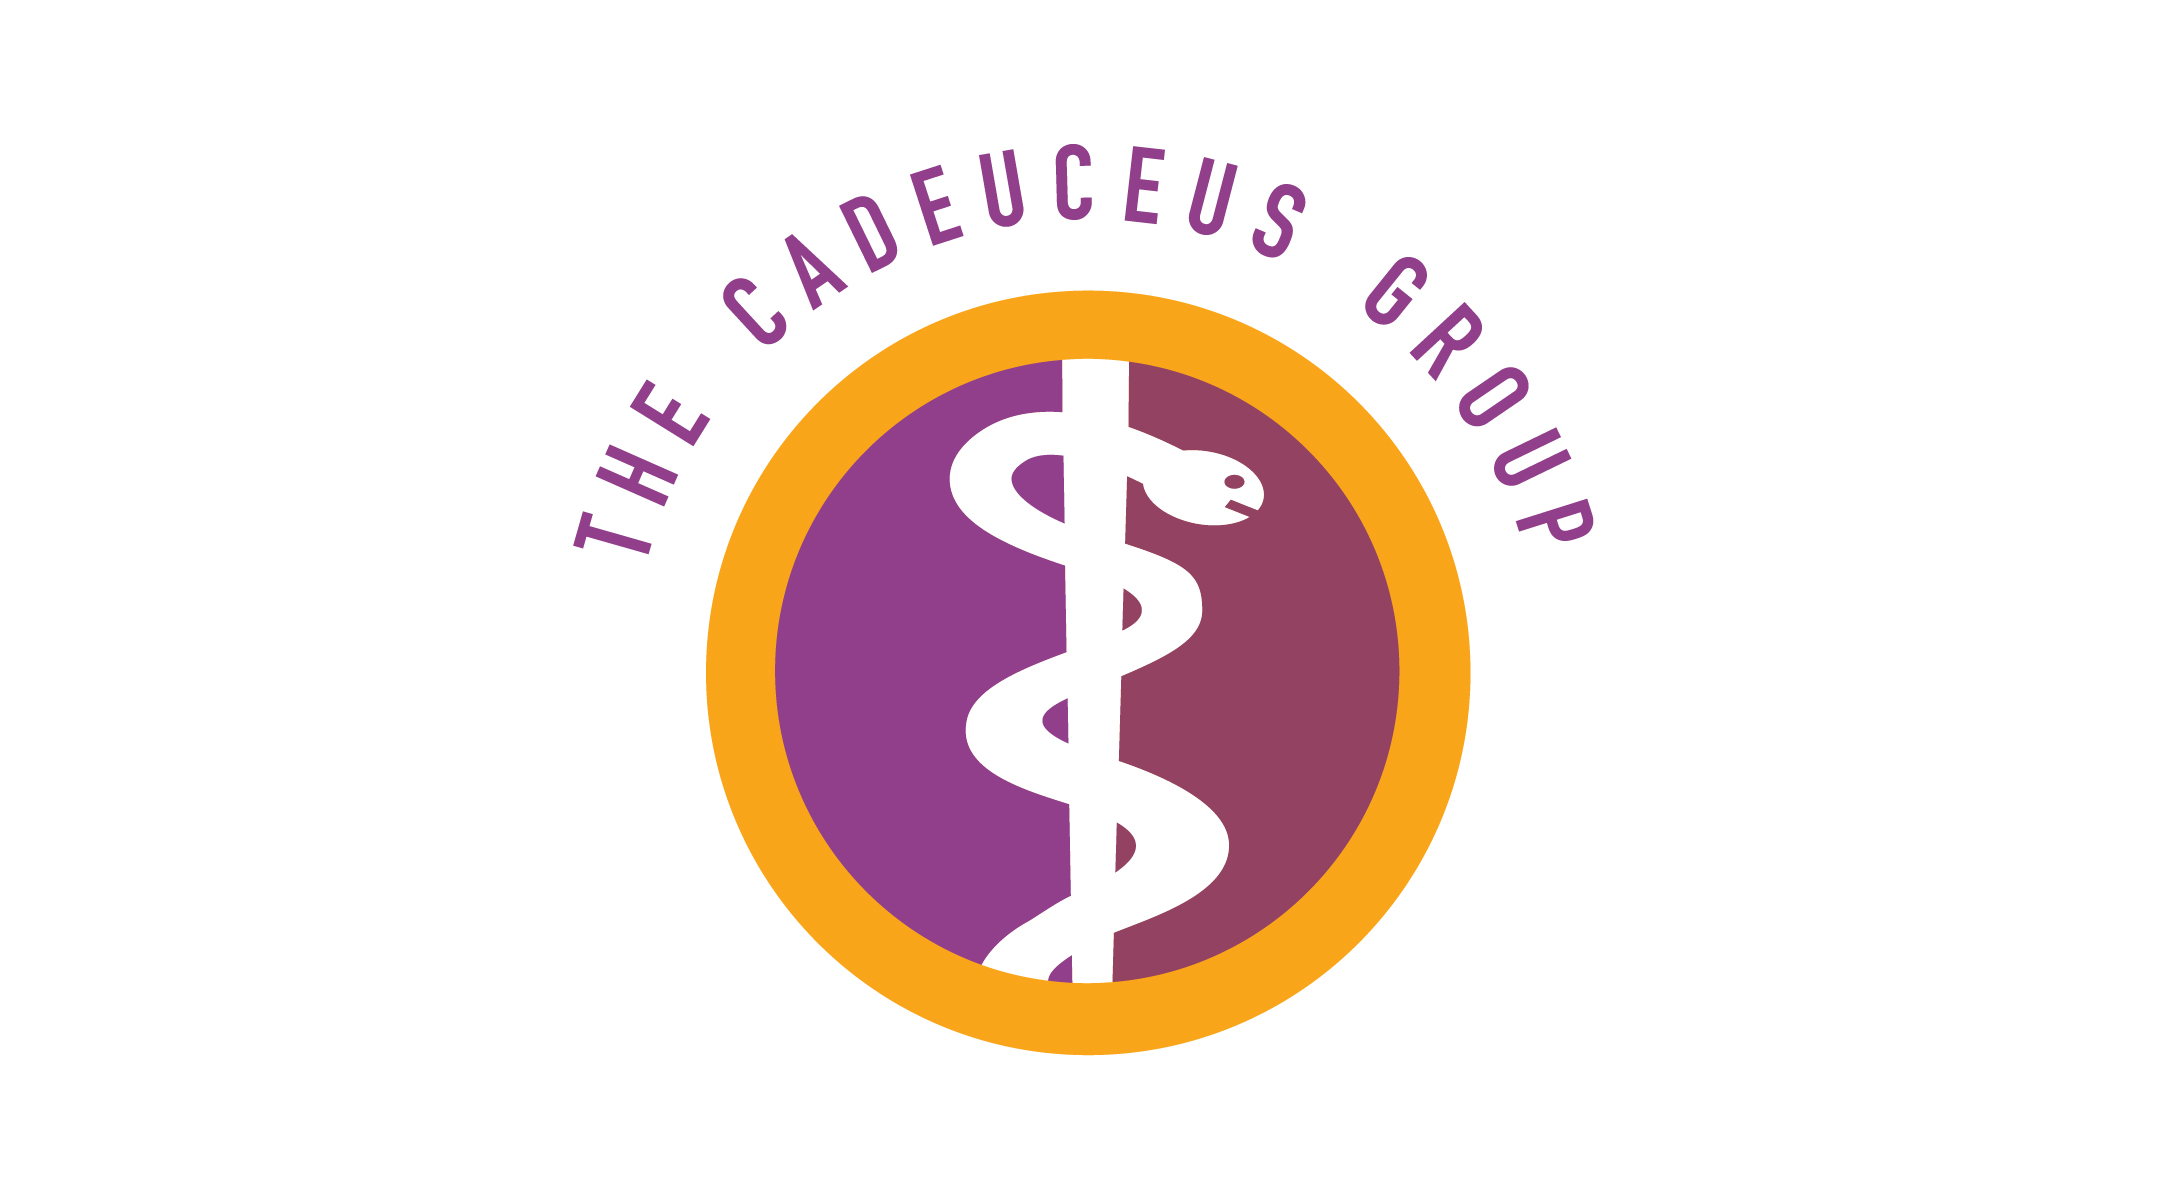 Logotype created for Cadeuceus Group, a division of Foundation for Better Healthcare.